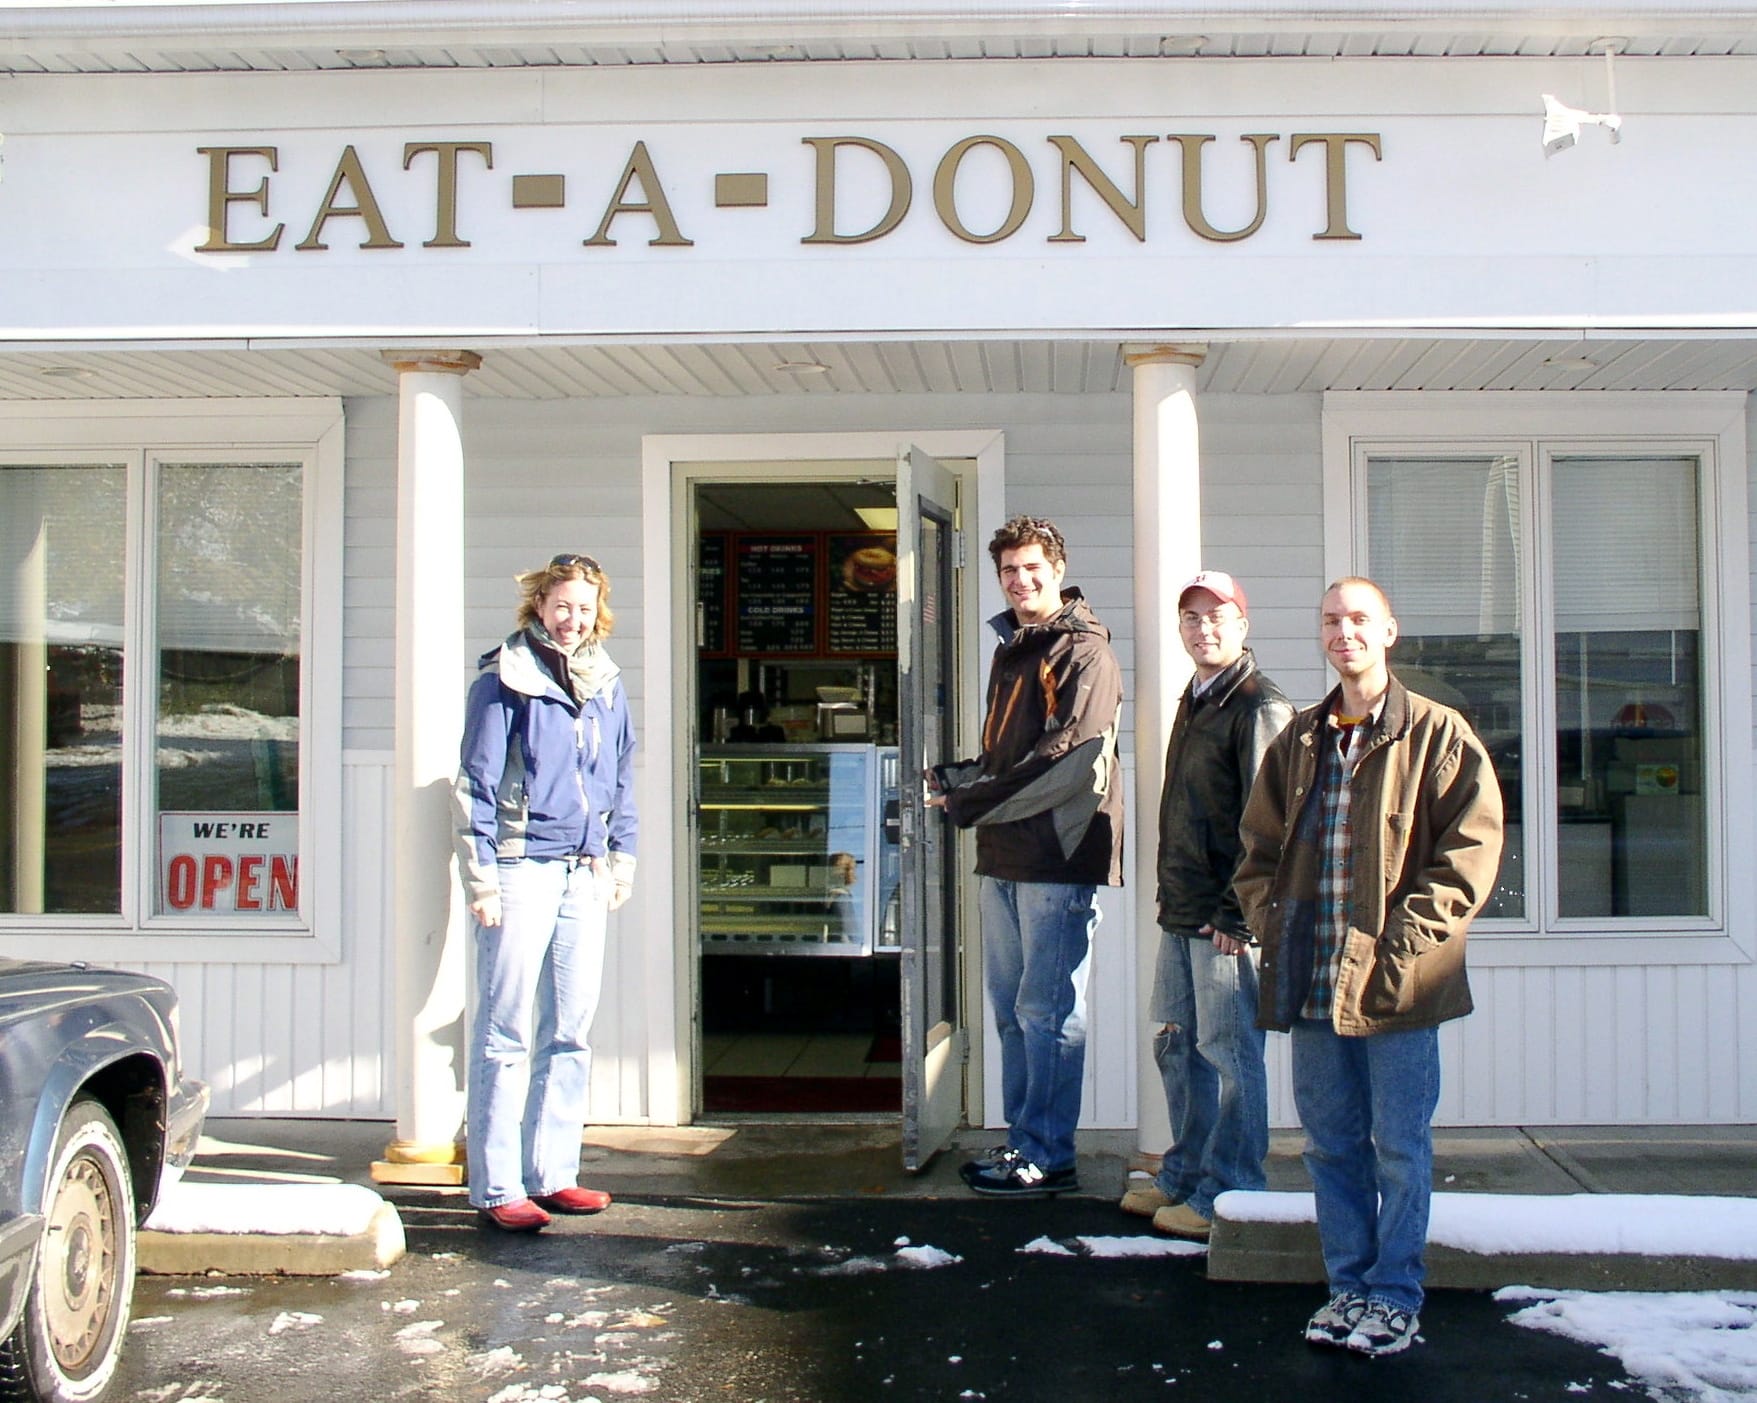 07-Eat-a-Donut, a picture from the donut tour